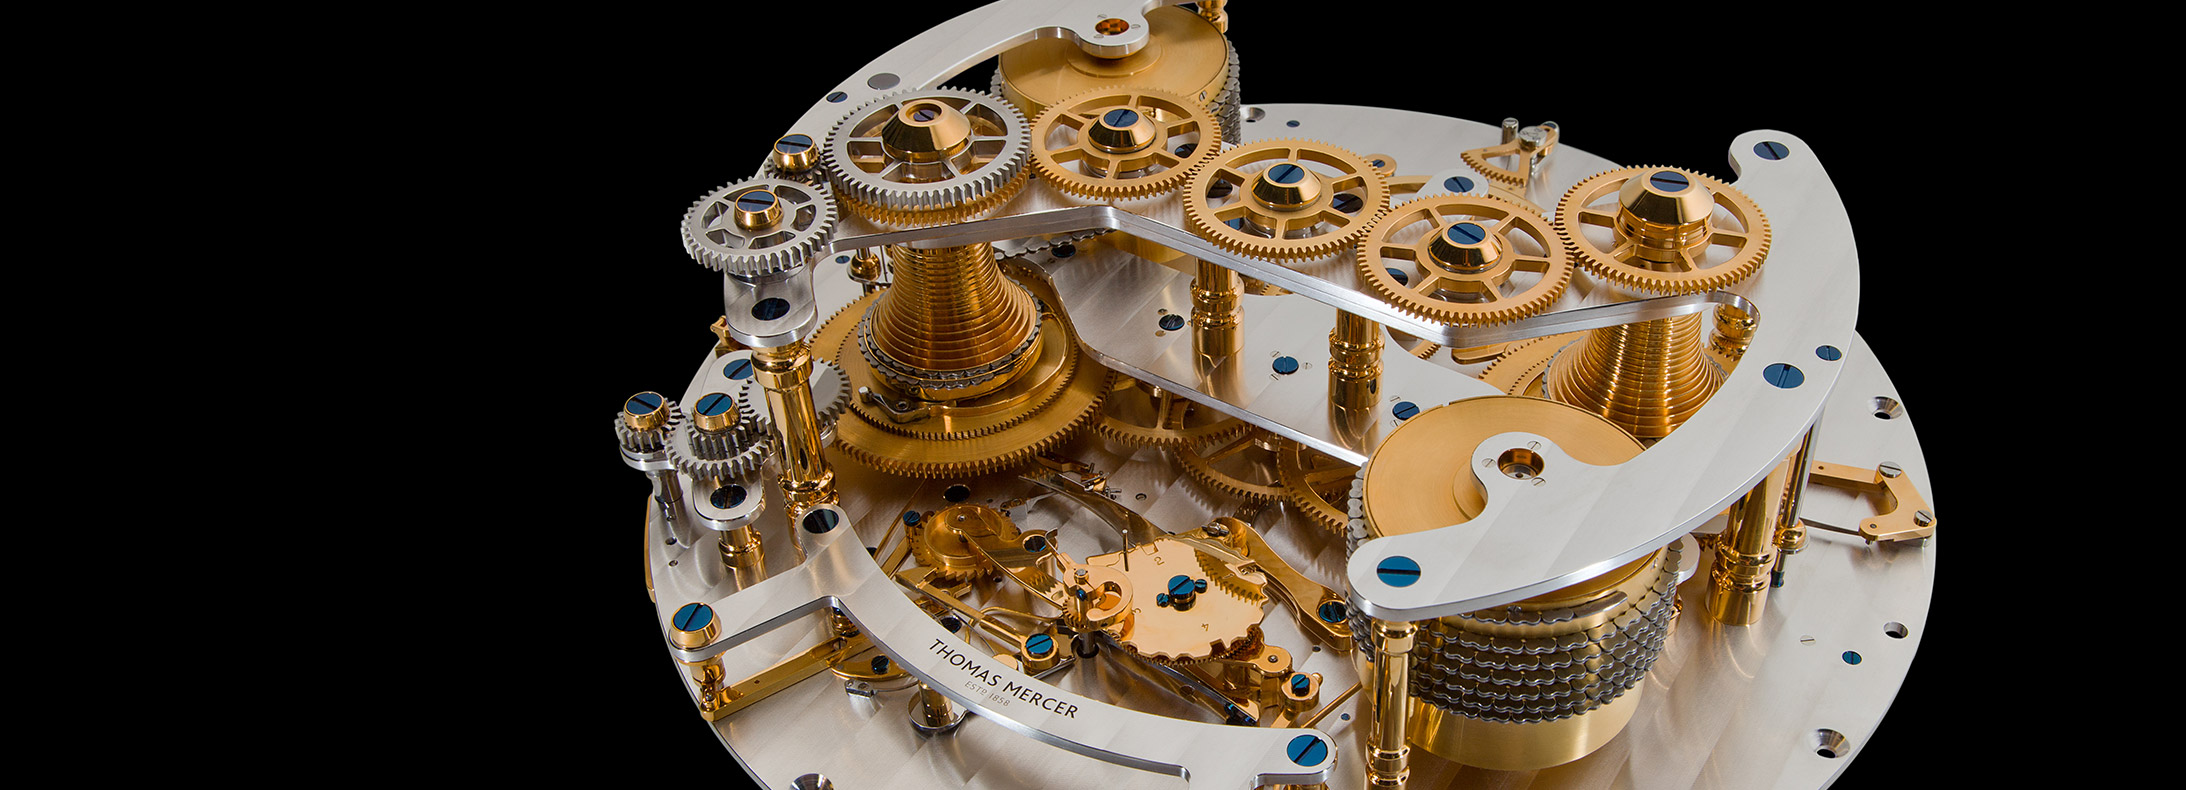 The marine chronometer for architect architecture and architects design.